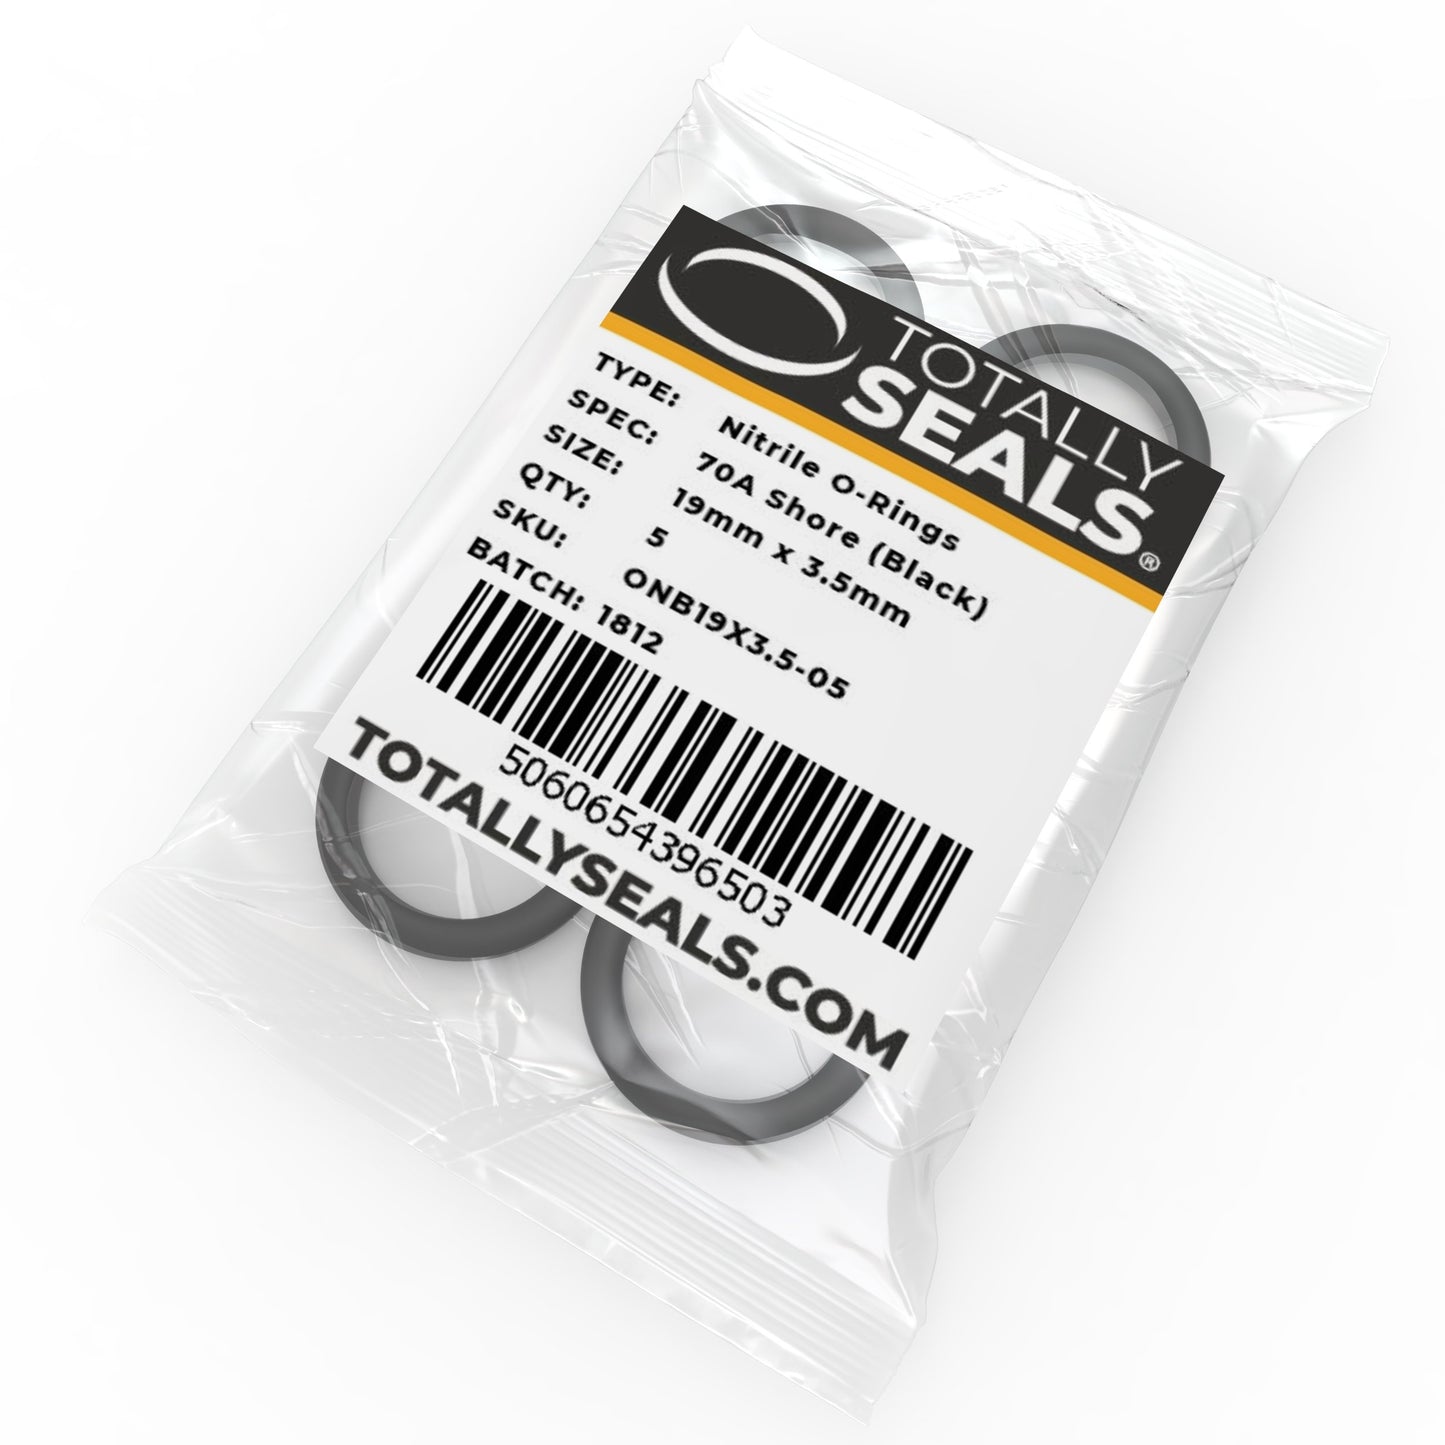 19mm x 3.5mm (26mm OD) Nitrile O-Rings - Totally Seals®